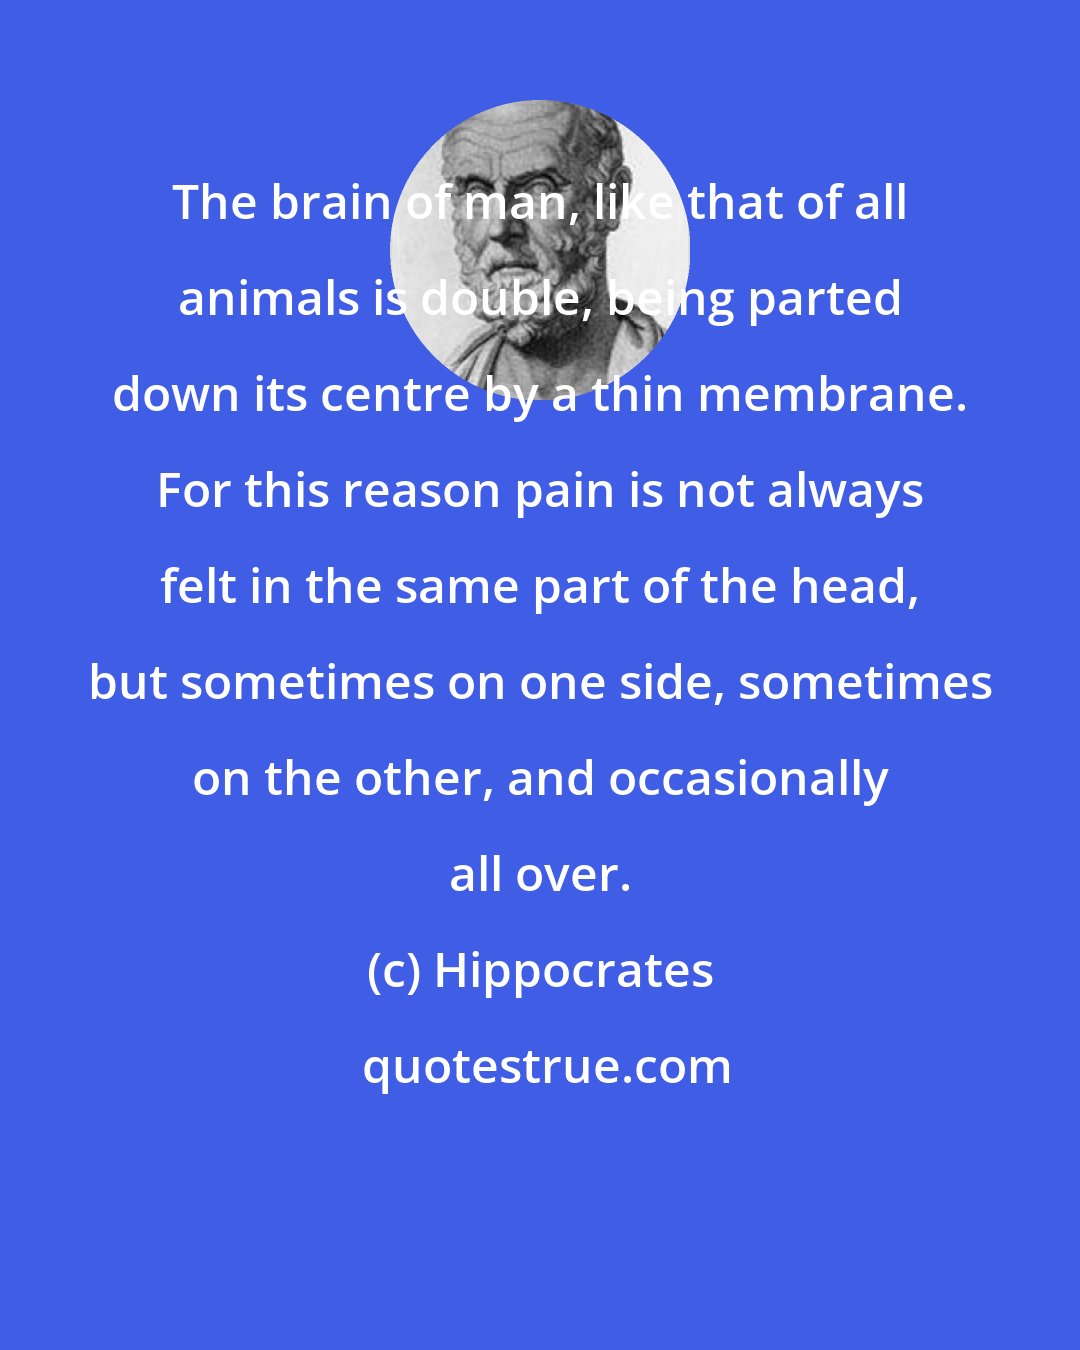 Hippocrates: The brain of man, like that of all animals is double, being parted down its centre by a thin membrane. For this reason pain is not always felt in the same part of the head, but sometimes on one side, sometimes on the other, and occasionally all over.